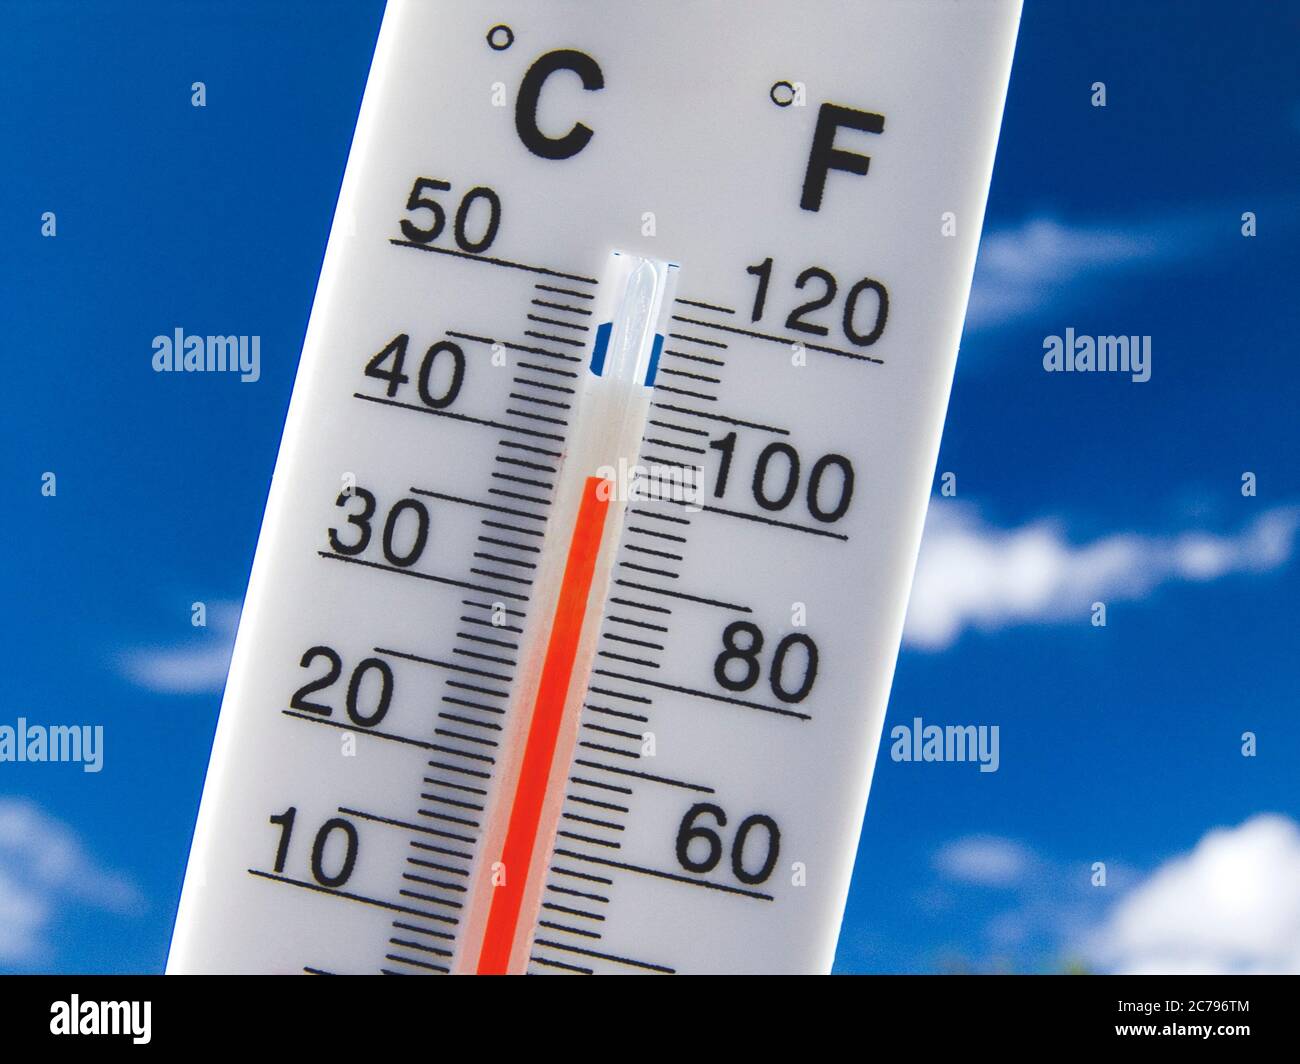 38C HEATWAVE 100F Temperature gauge rising red Concept Thermometer displays hot & sunny 38C centigrade 100F degrees farenheit against a bright blue sky Stock Photo